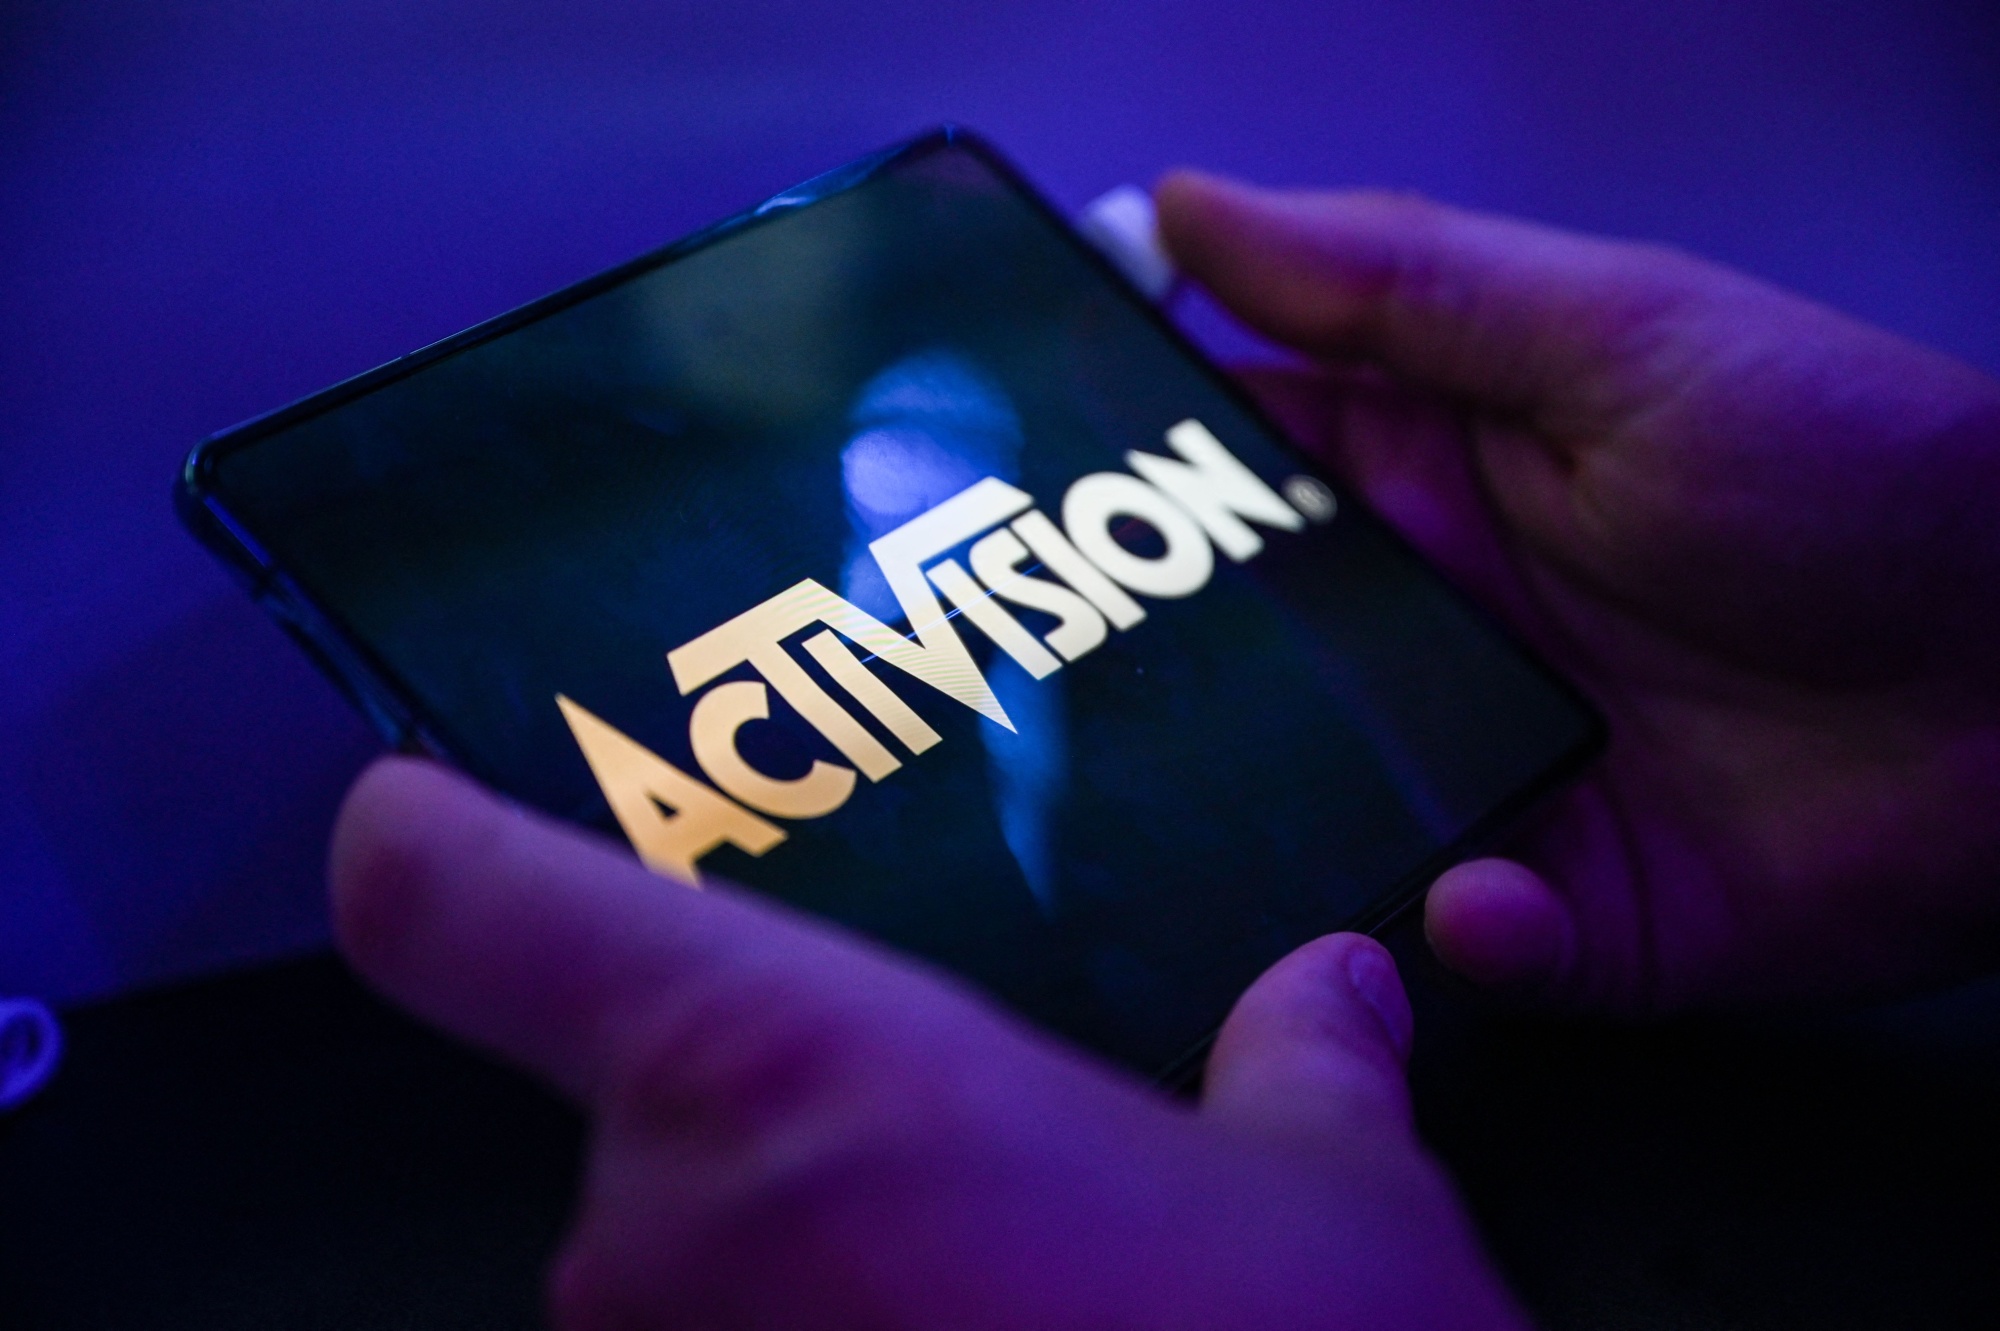 Gaming Giant Activision Blizzard Stock Could Get Crushed [Again